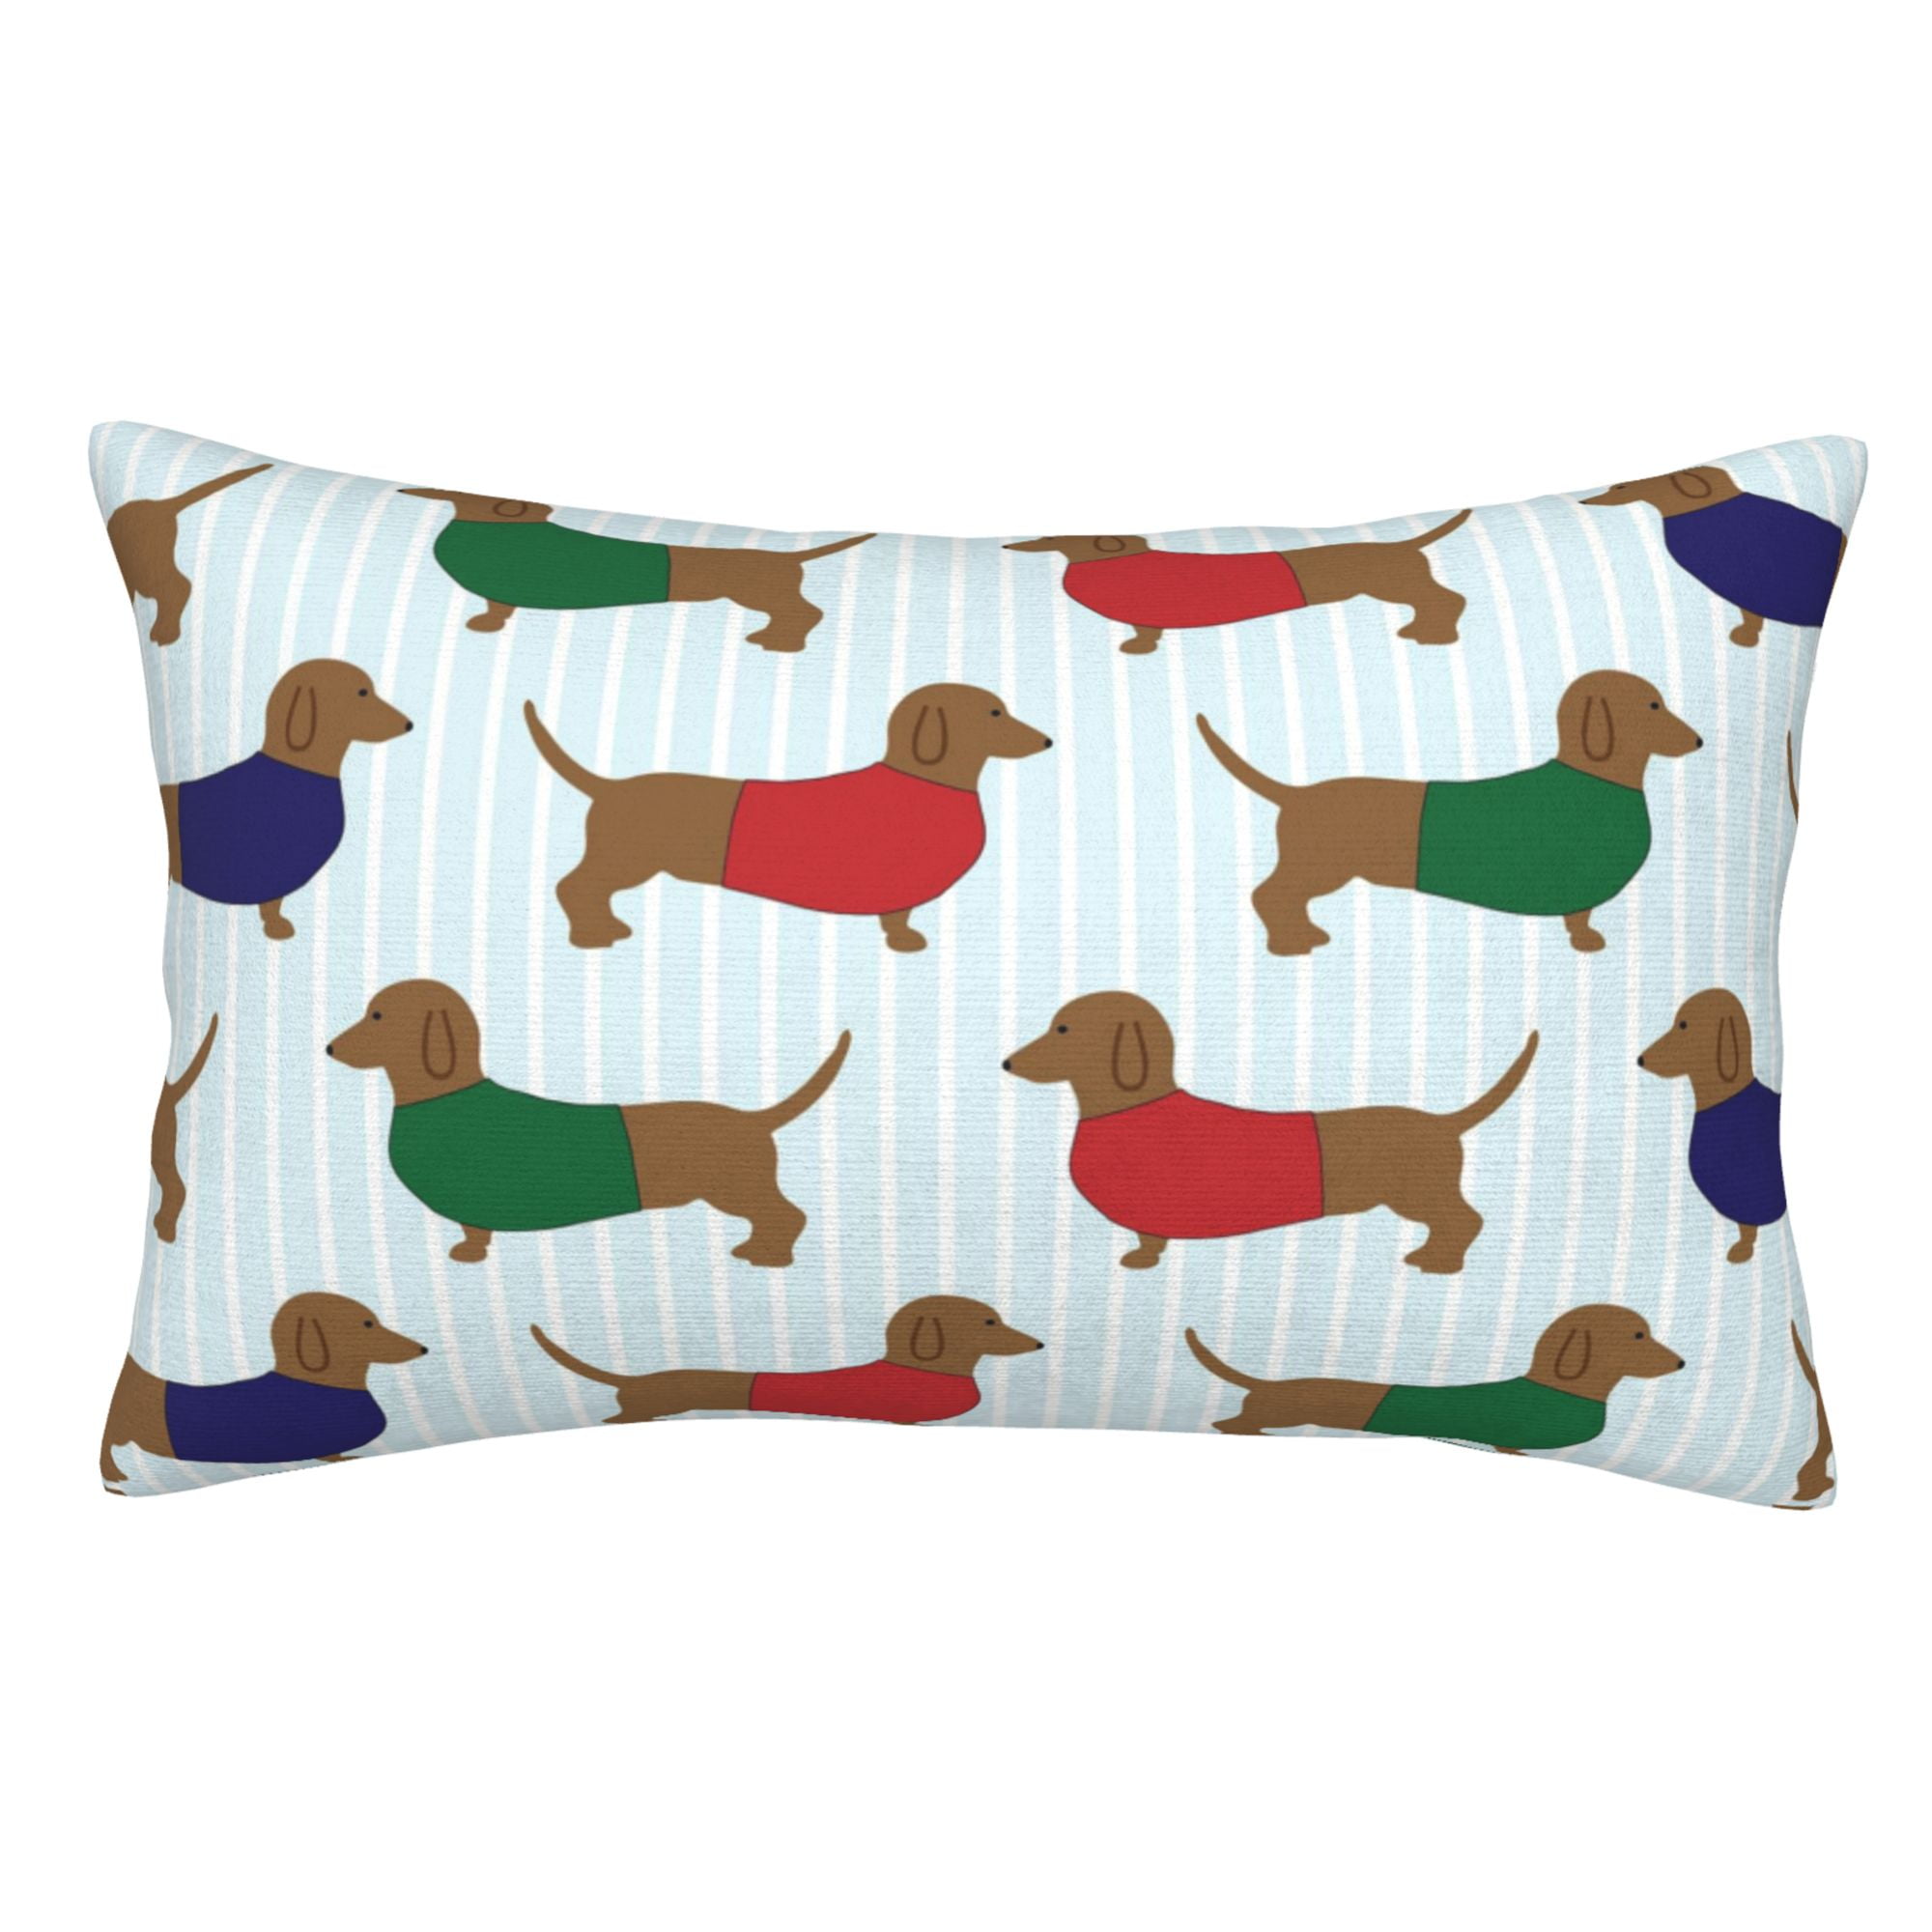 Dogs Driving Otis in Vintage Cars Throw Pillows 